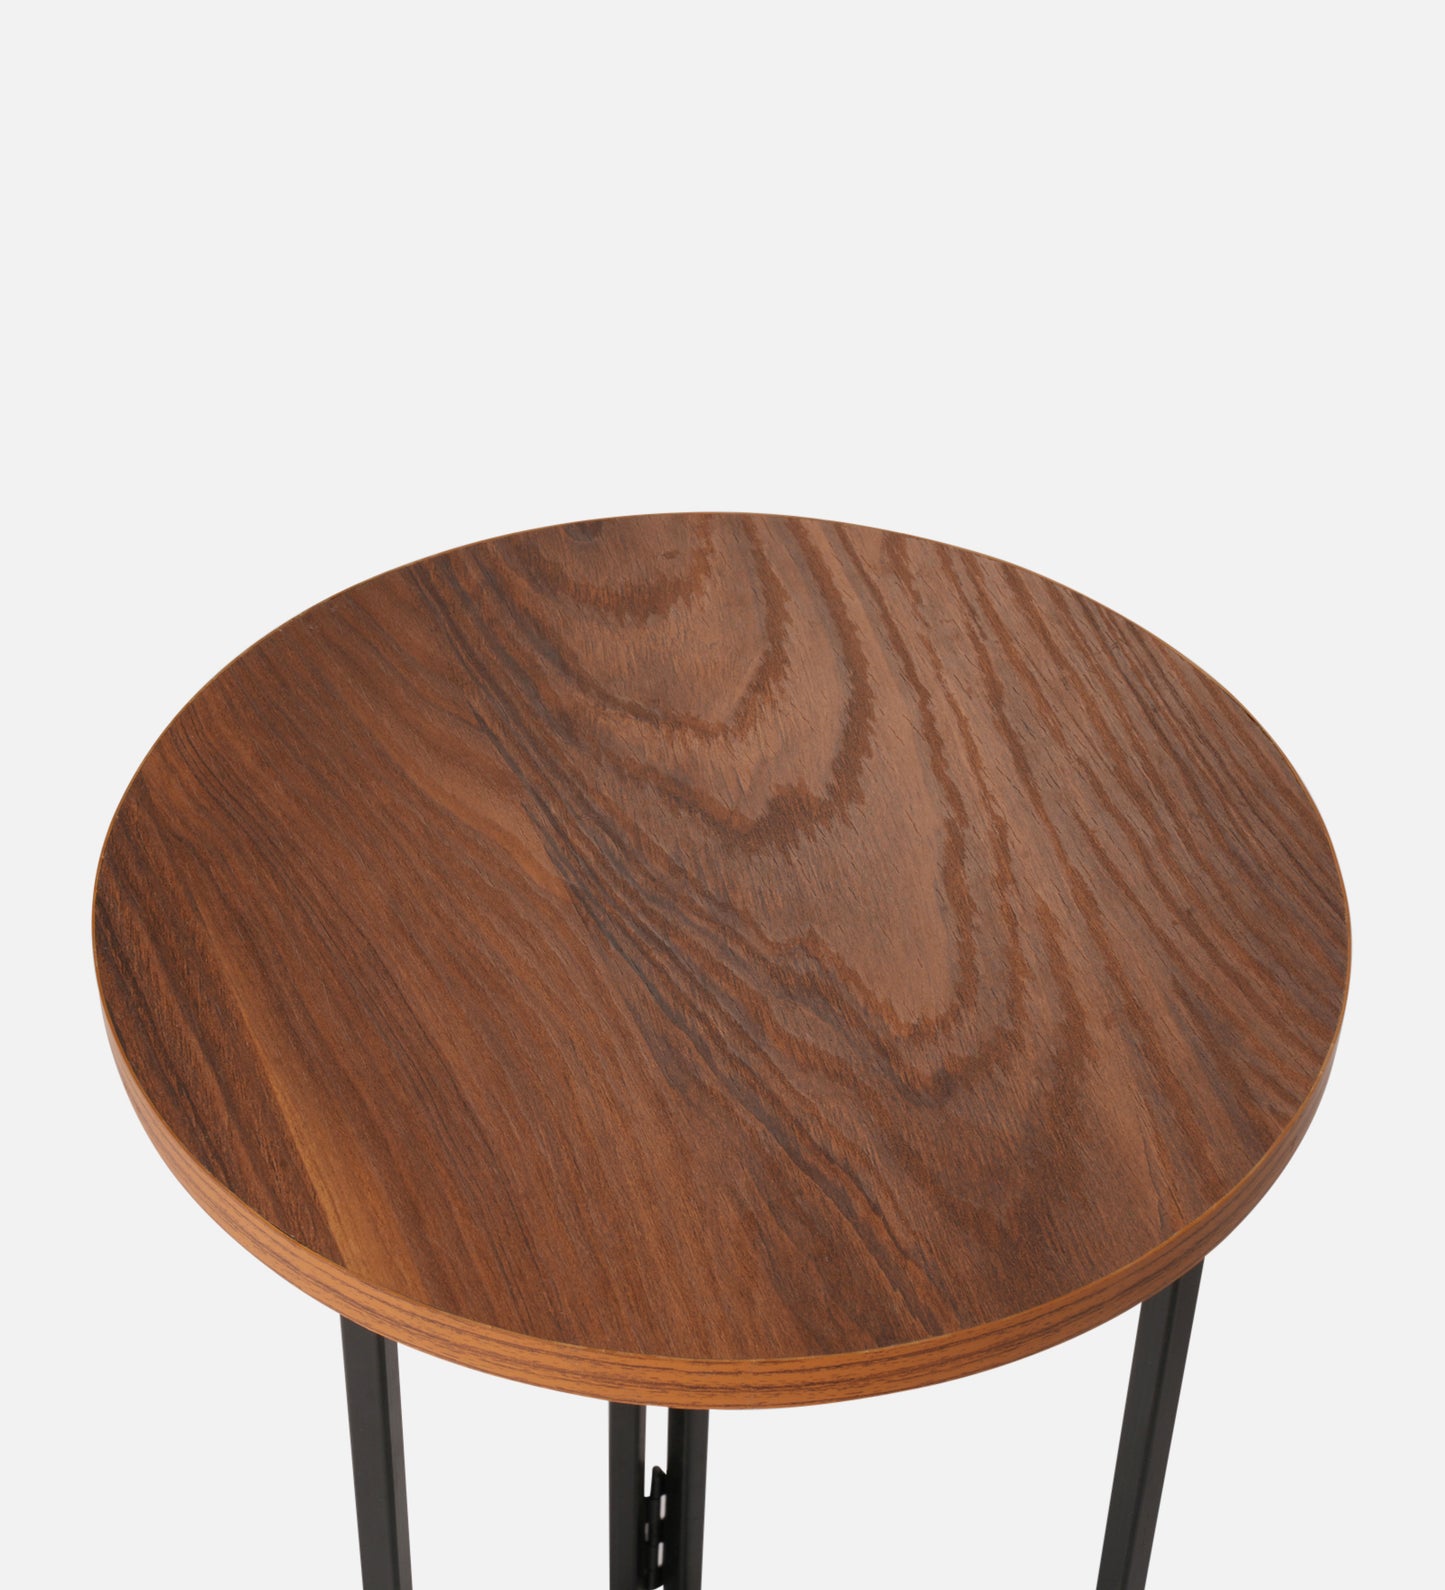 Teak Hues (Charcoal Legs) Round Oblique Side Tables, Wooden Tables, Living Room Decor by A Tiny Mistake